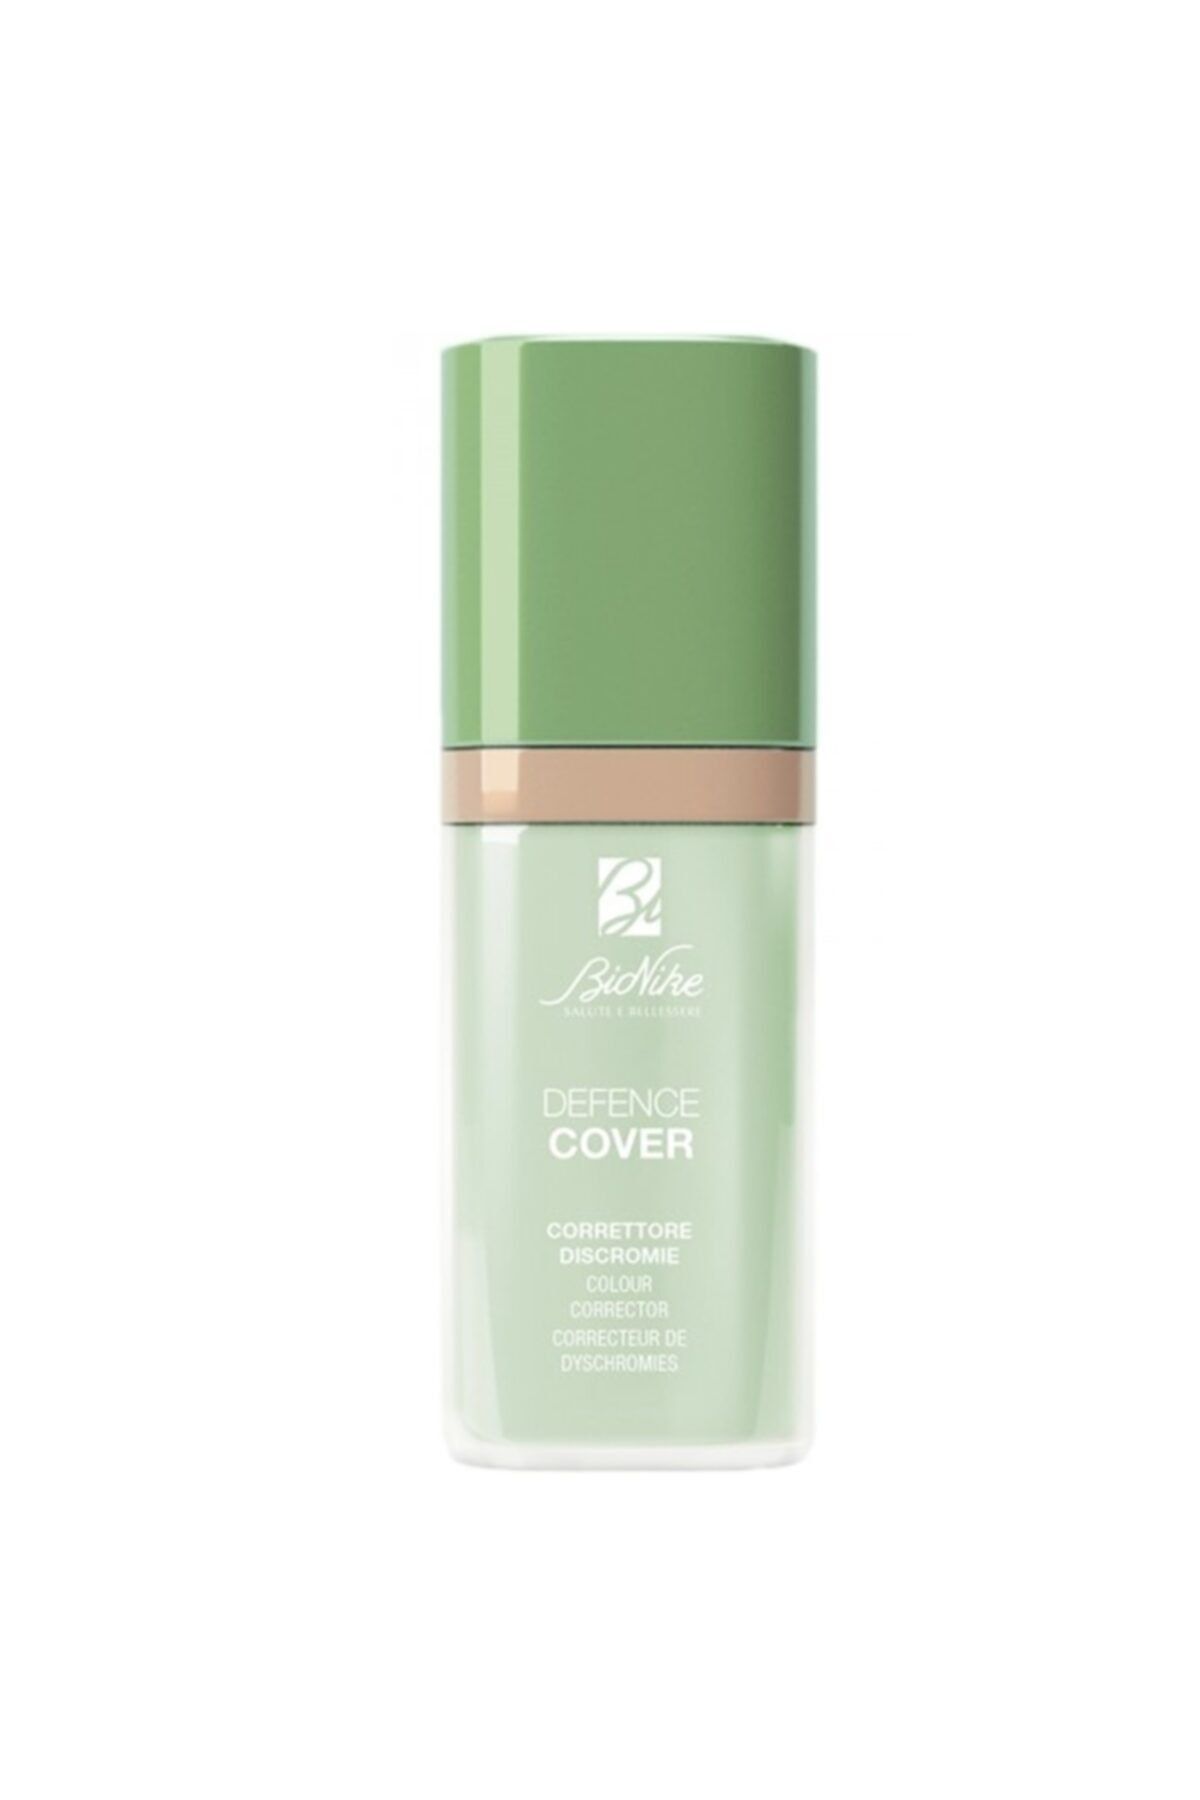 BioNike Defence Cover Colour Corrector 12 ml | Vert 8029041179515